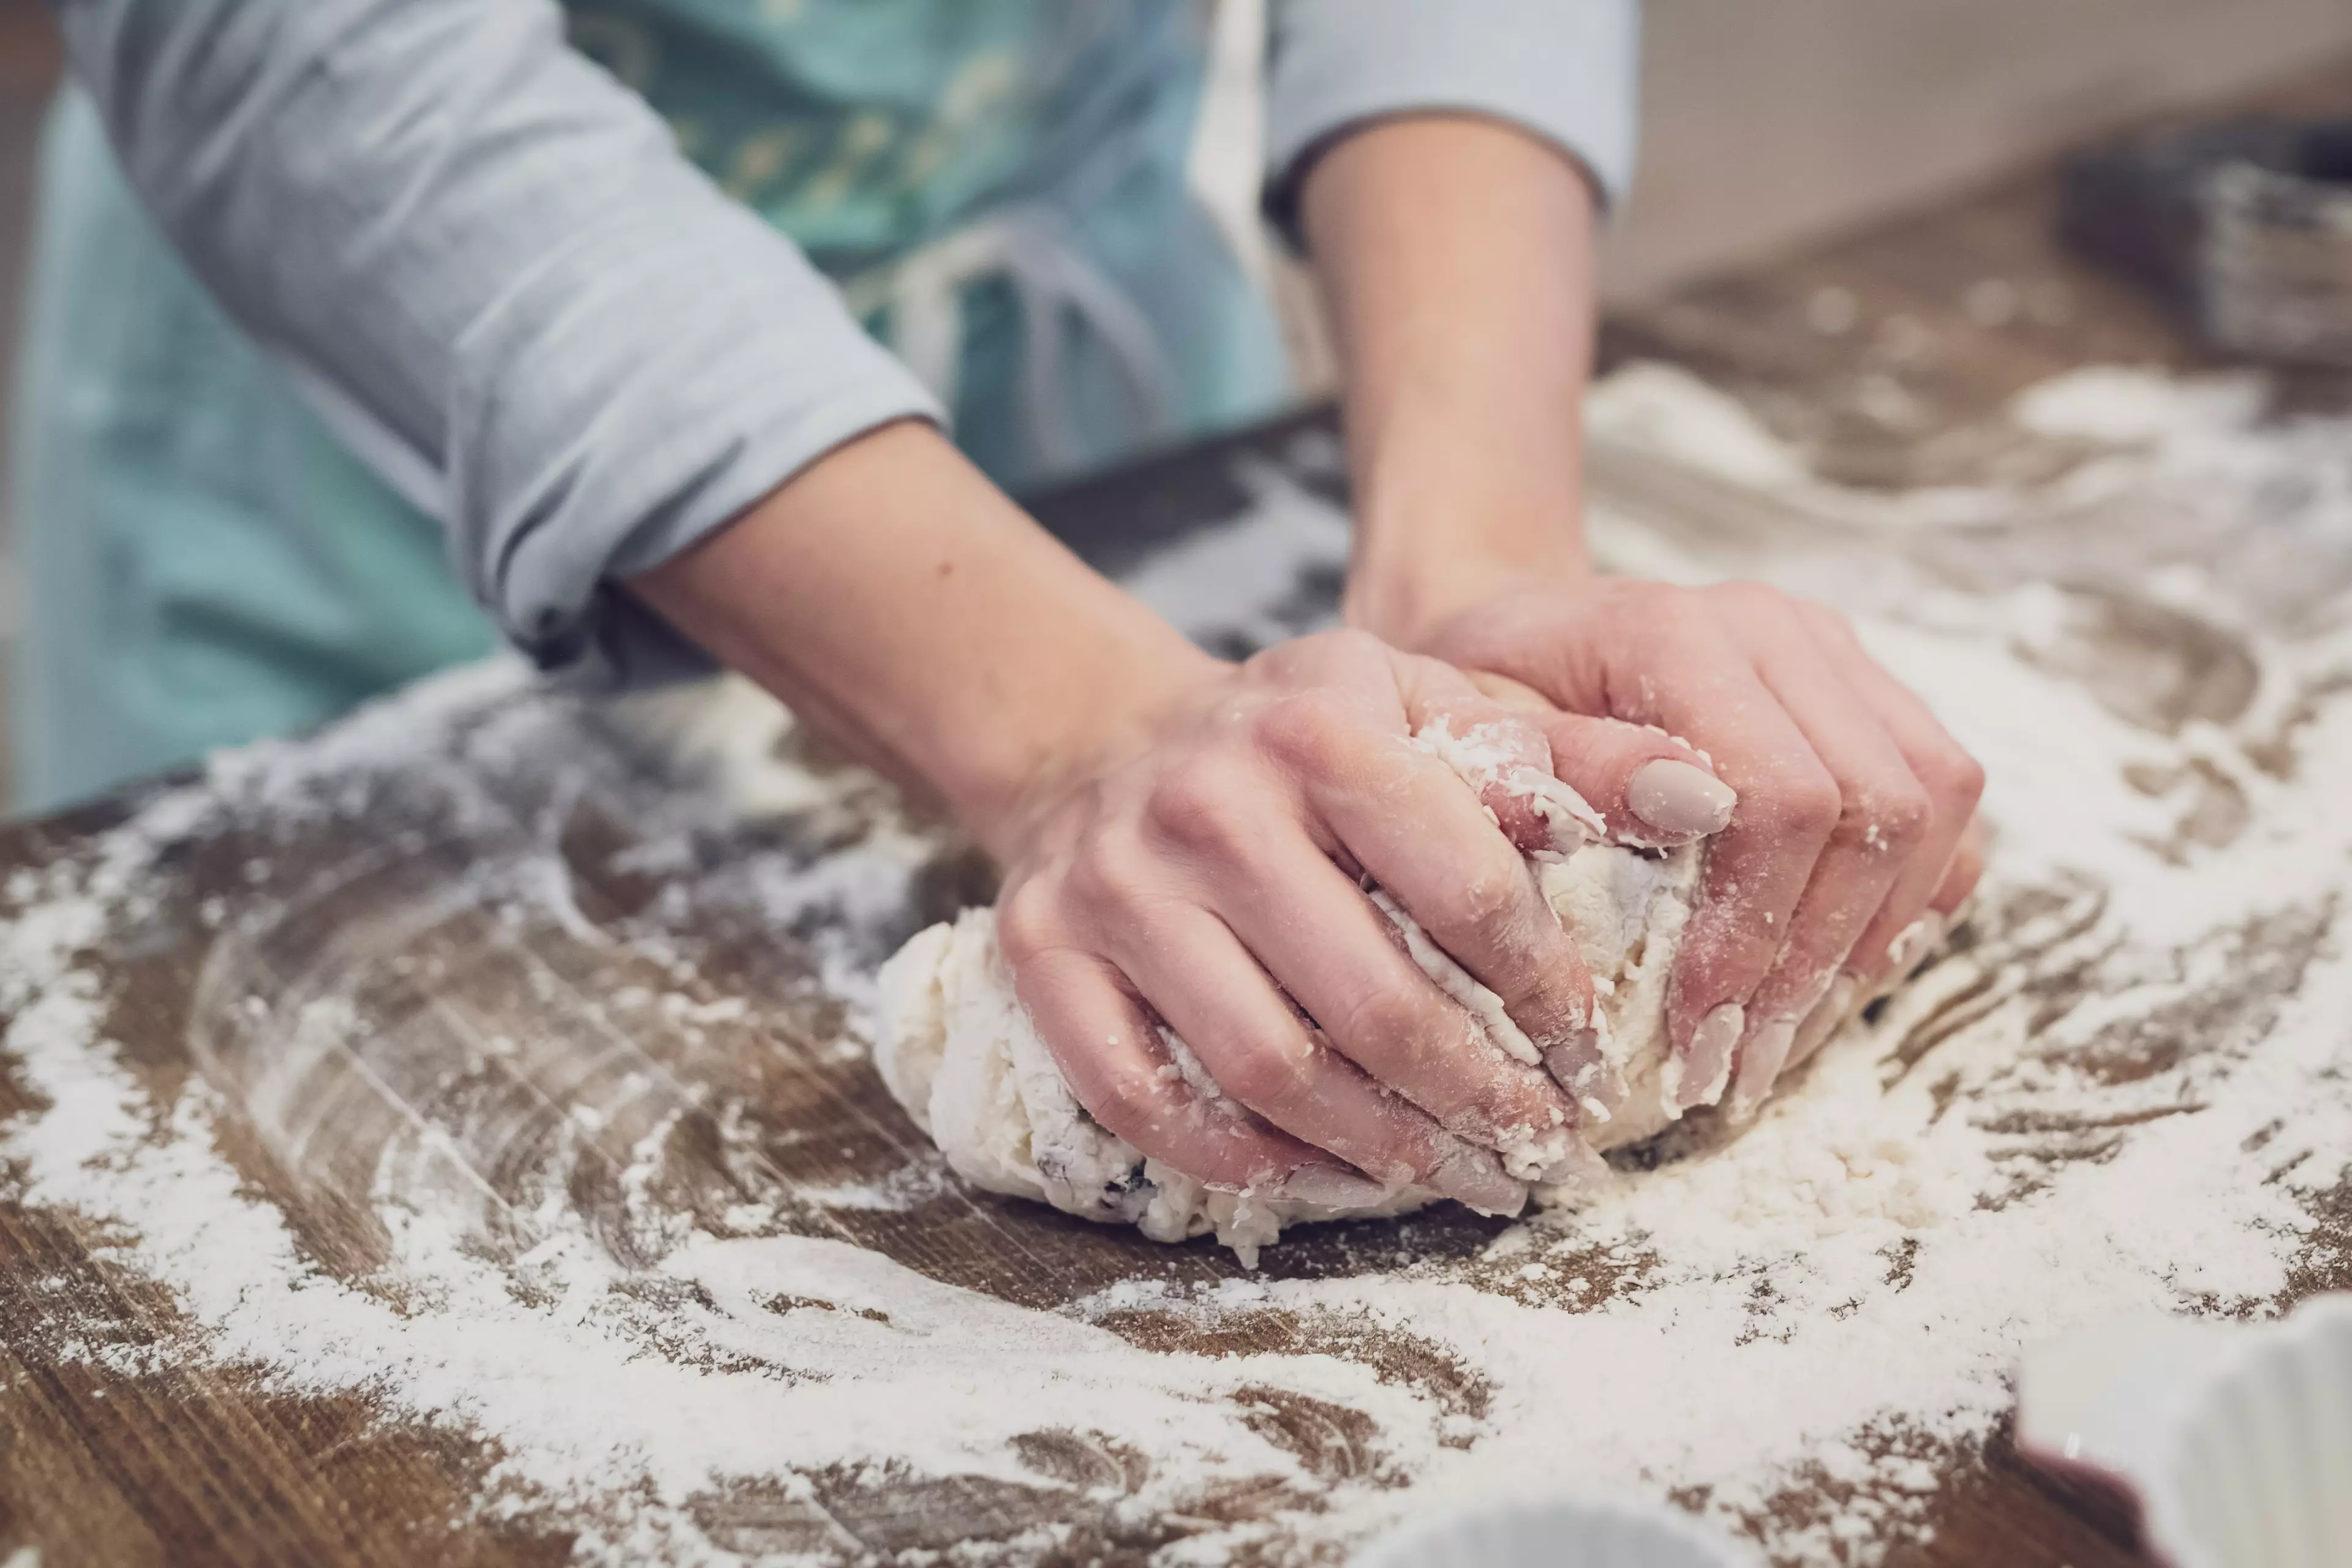 Demand for flour has surged during lockdown as many turn their hands to baking (